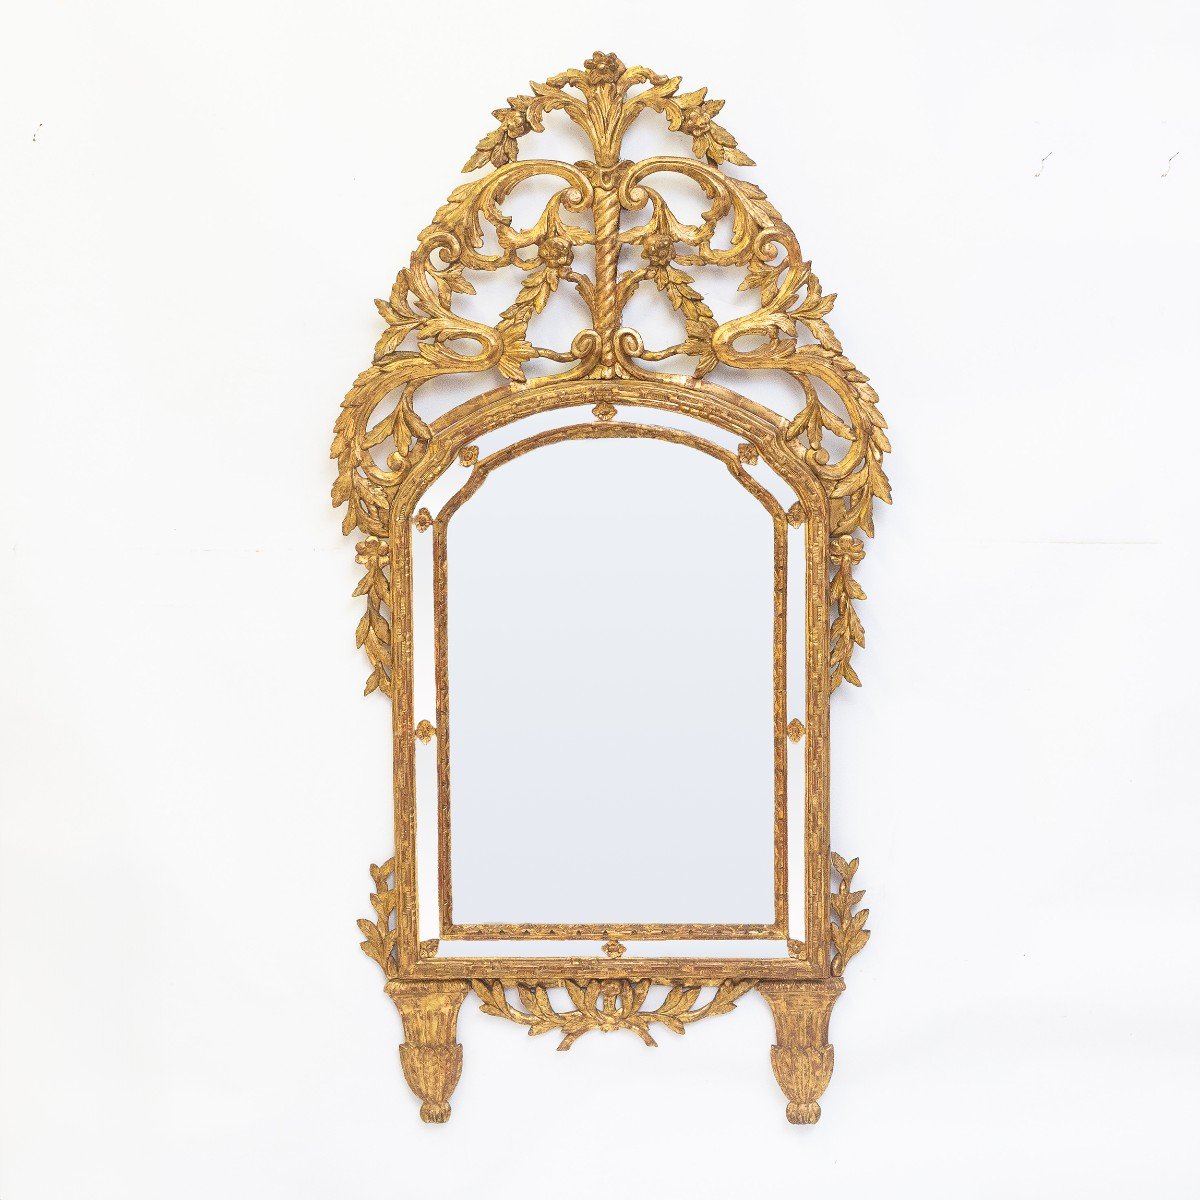 Gilded Wooden Mirror/fireplace, Original Louis XVI From The 1700s